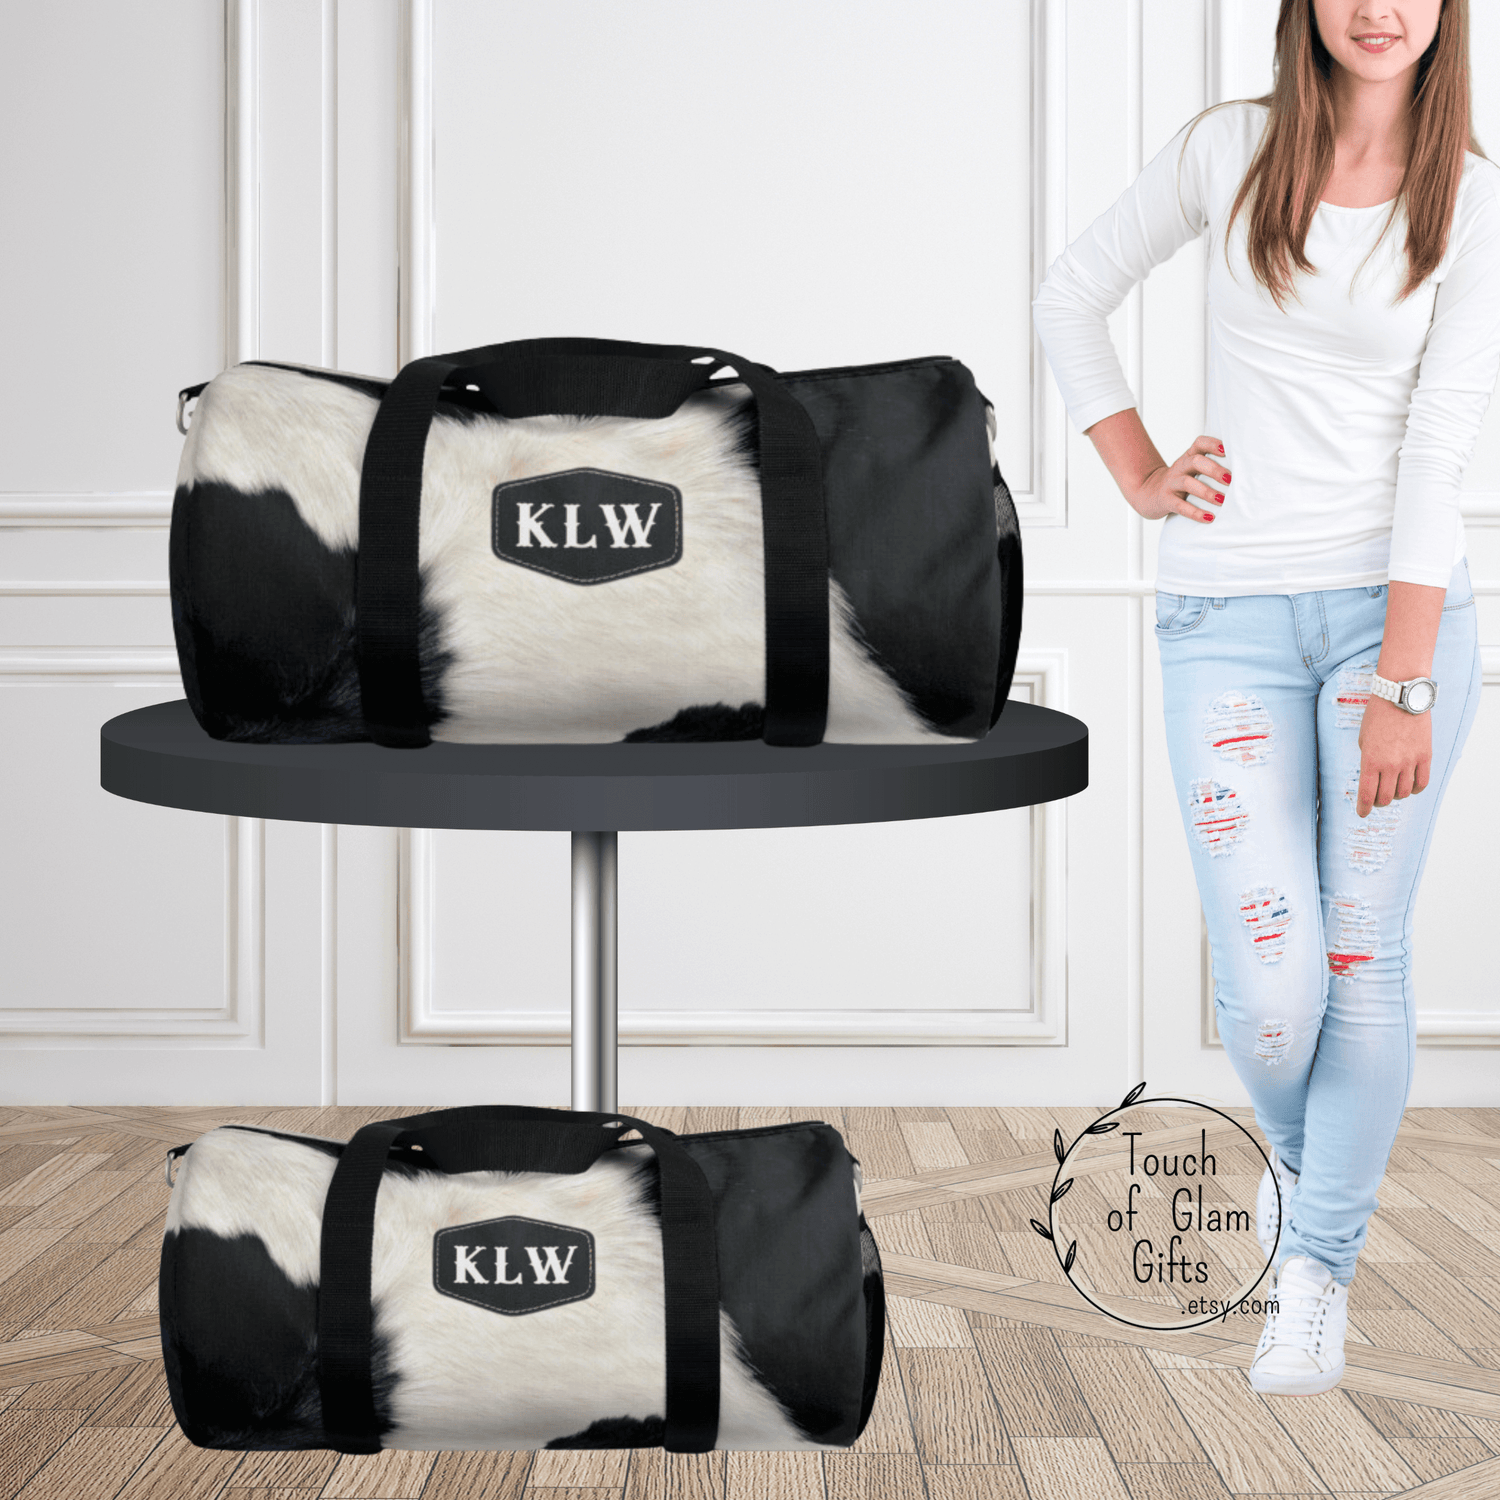 Our black and white cowhide print duffel bag is shown with monogrammed initials on the bag. The duffel bag is canvas with a cow print and can be ordered in large or small size bag.